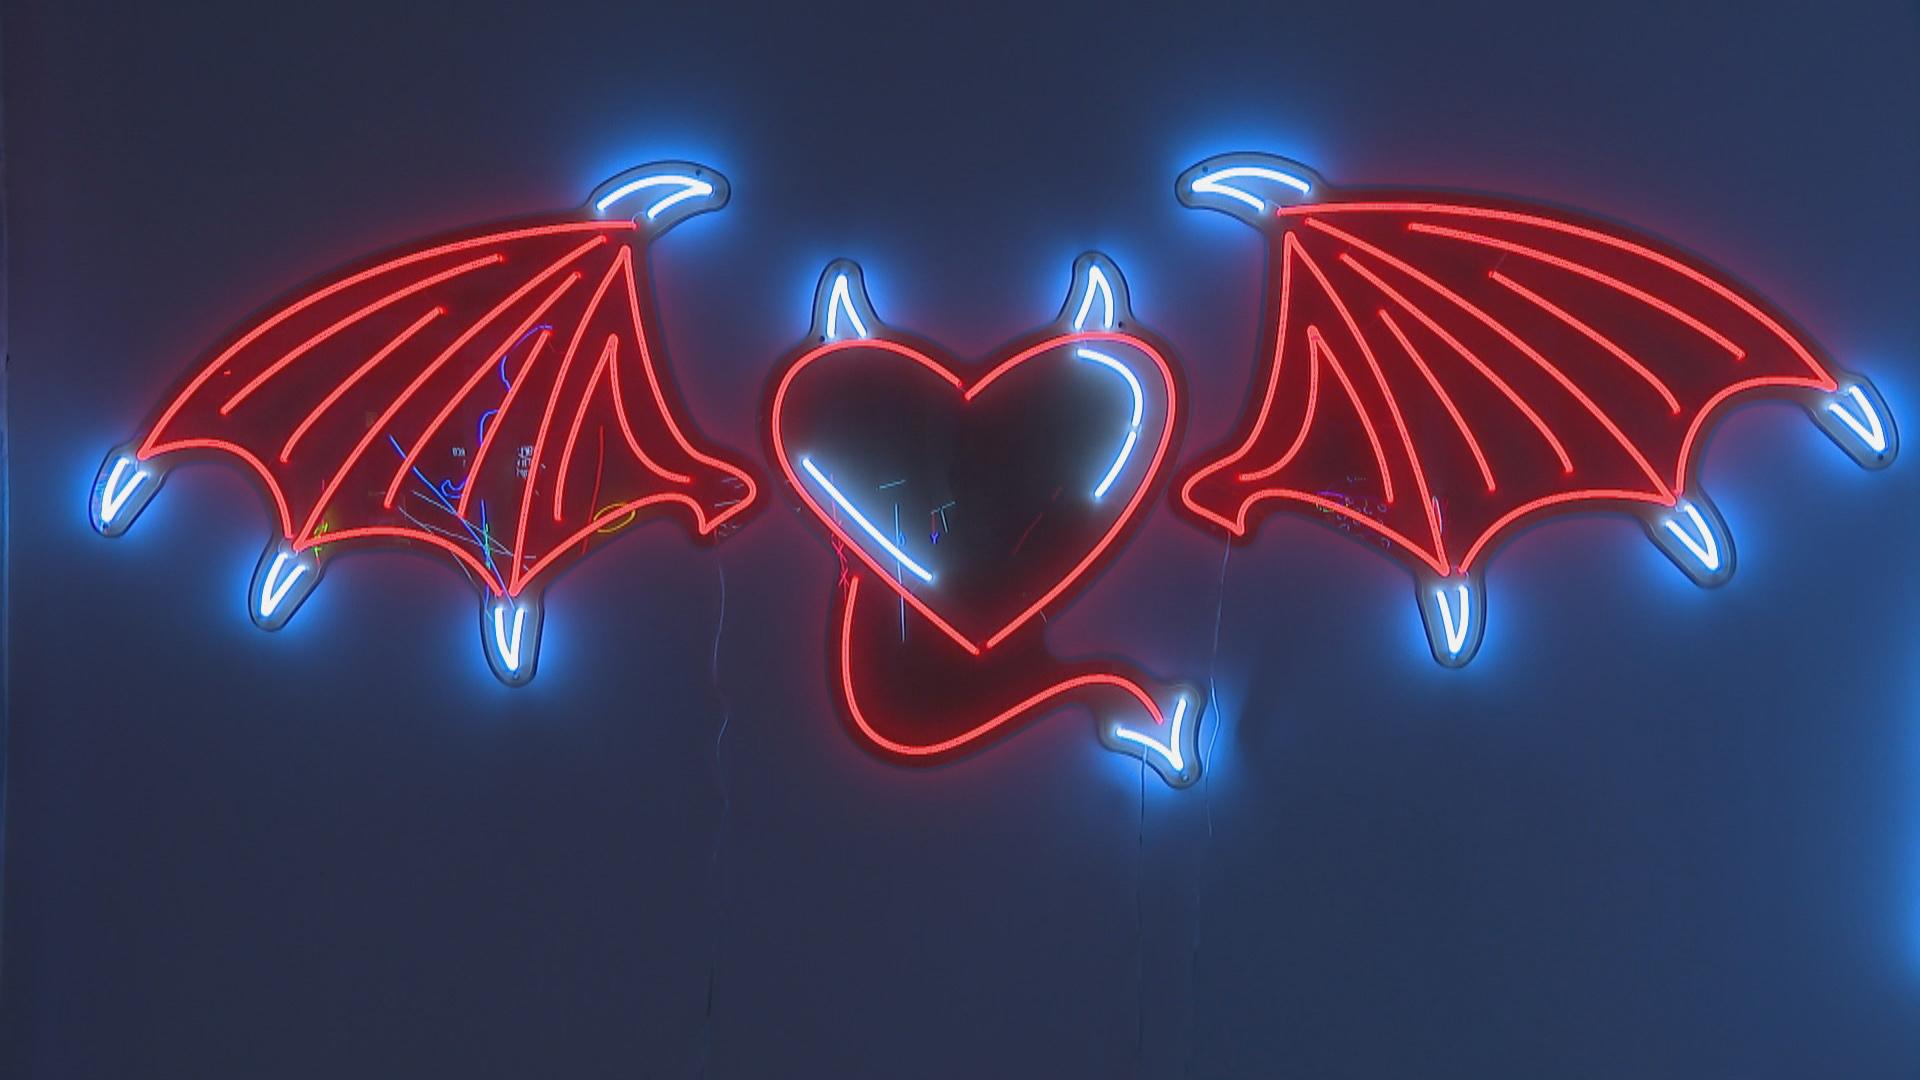 A work of art featured at the Neon and Light Museum. (WTTW News)